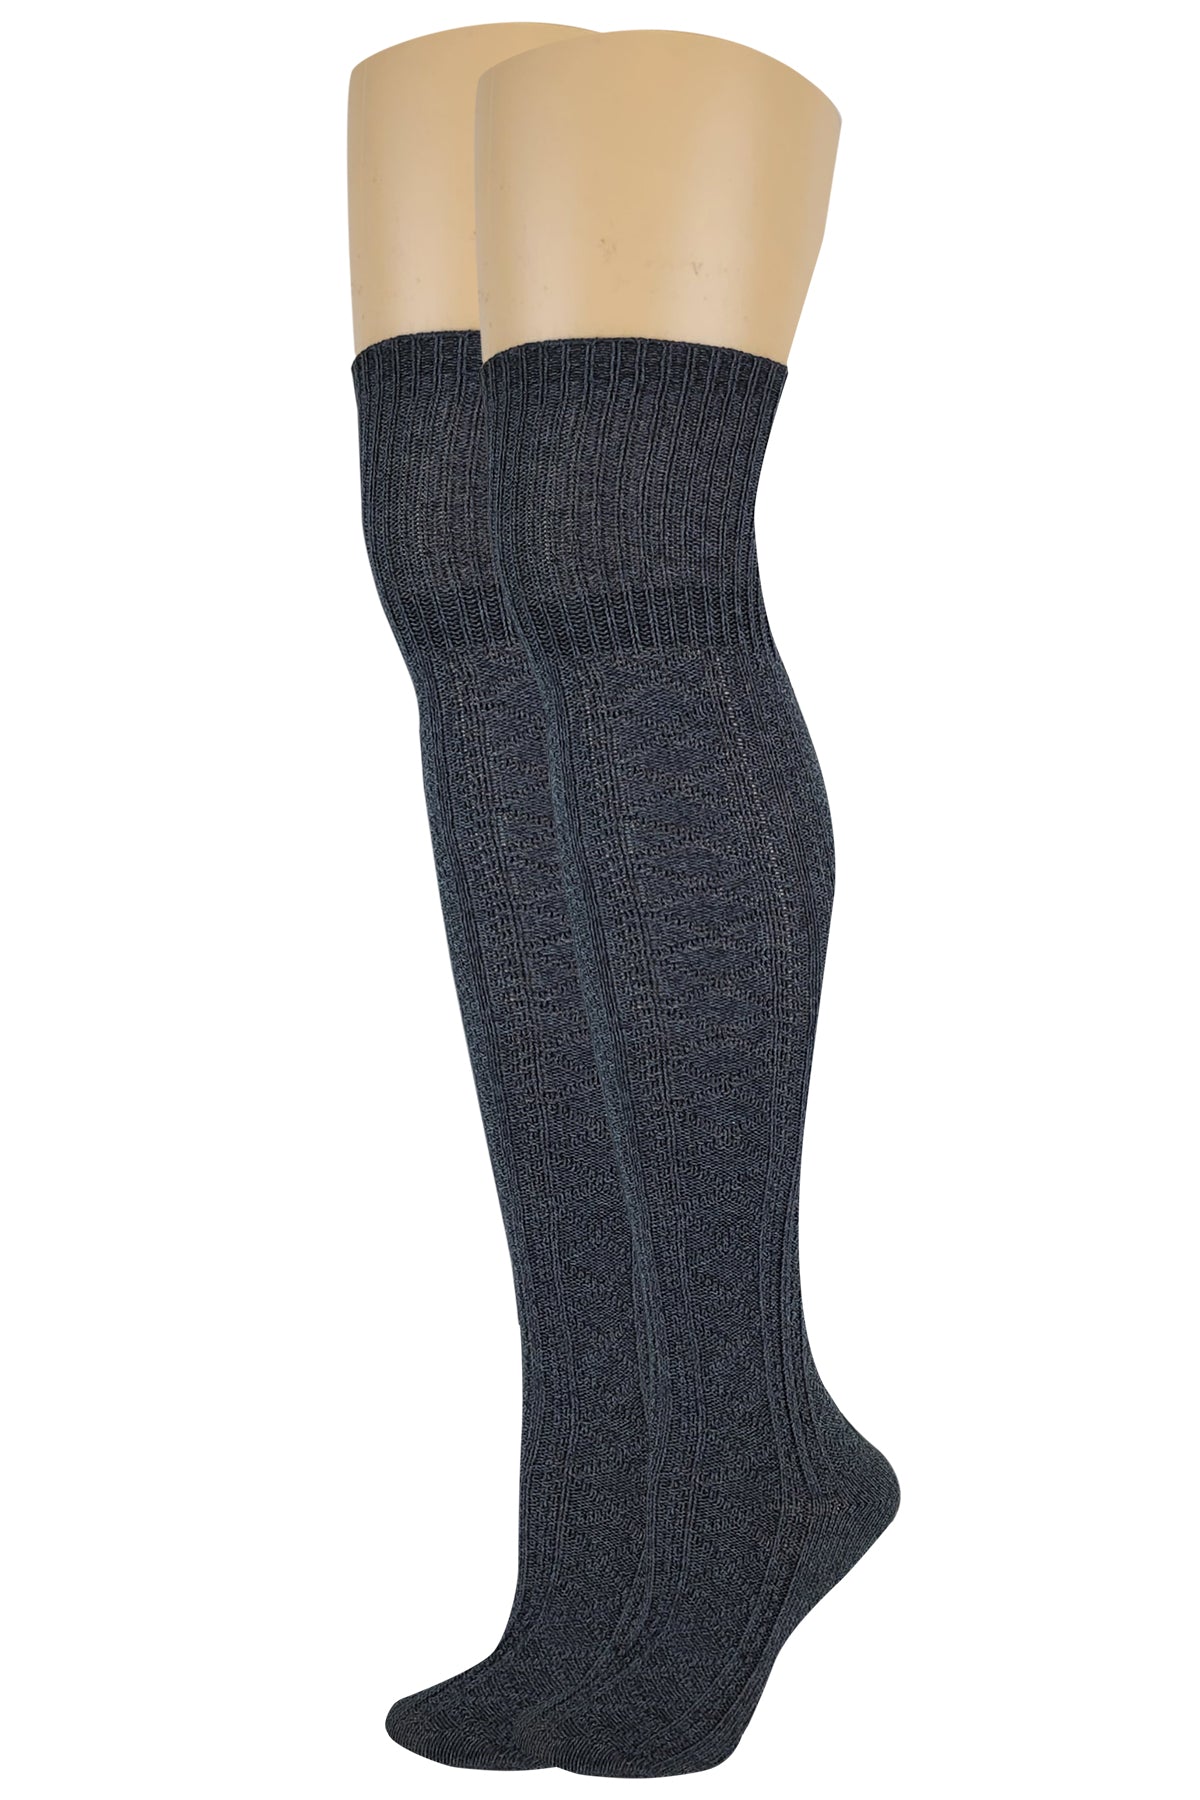 6 Pairs Women Sumona Knit Assorted Colors Over the Knee Socks